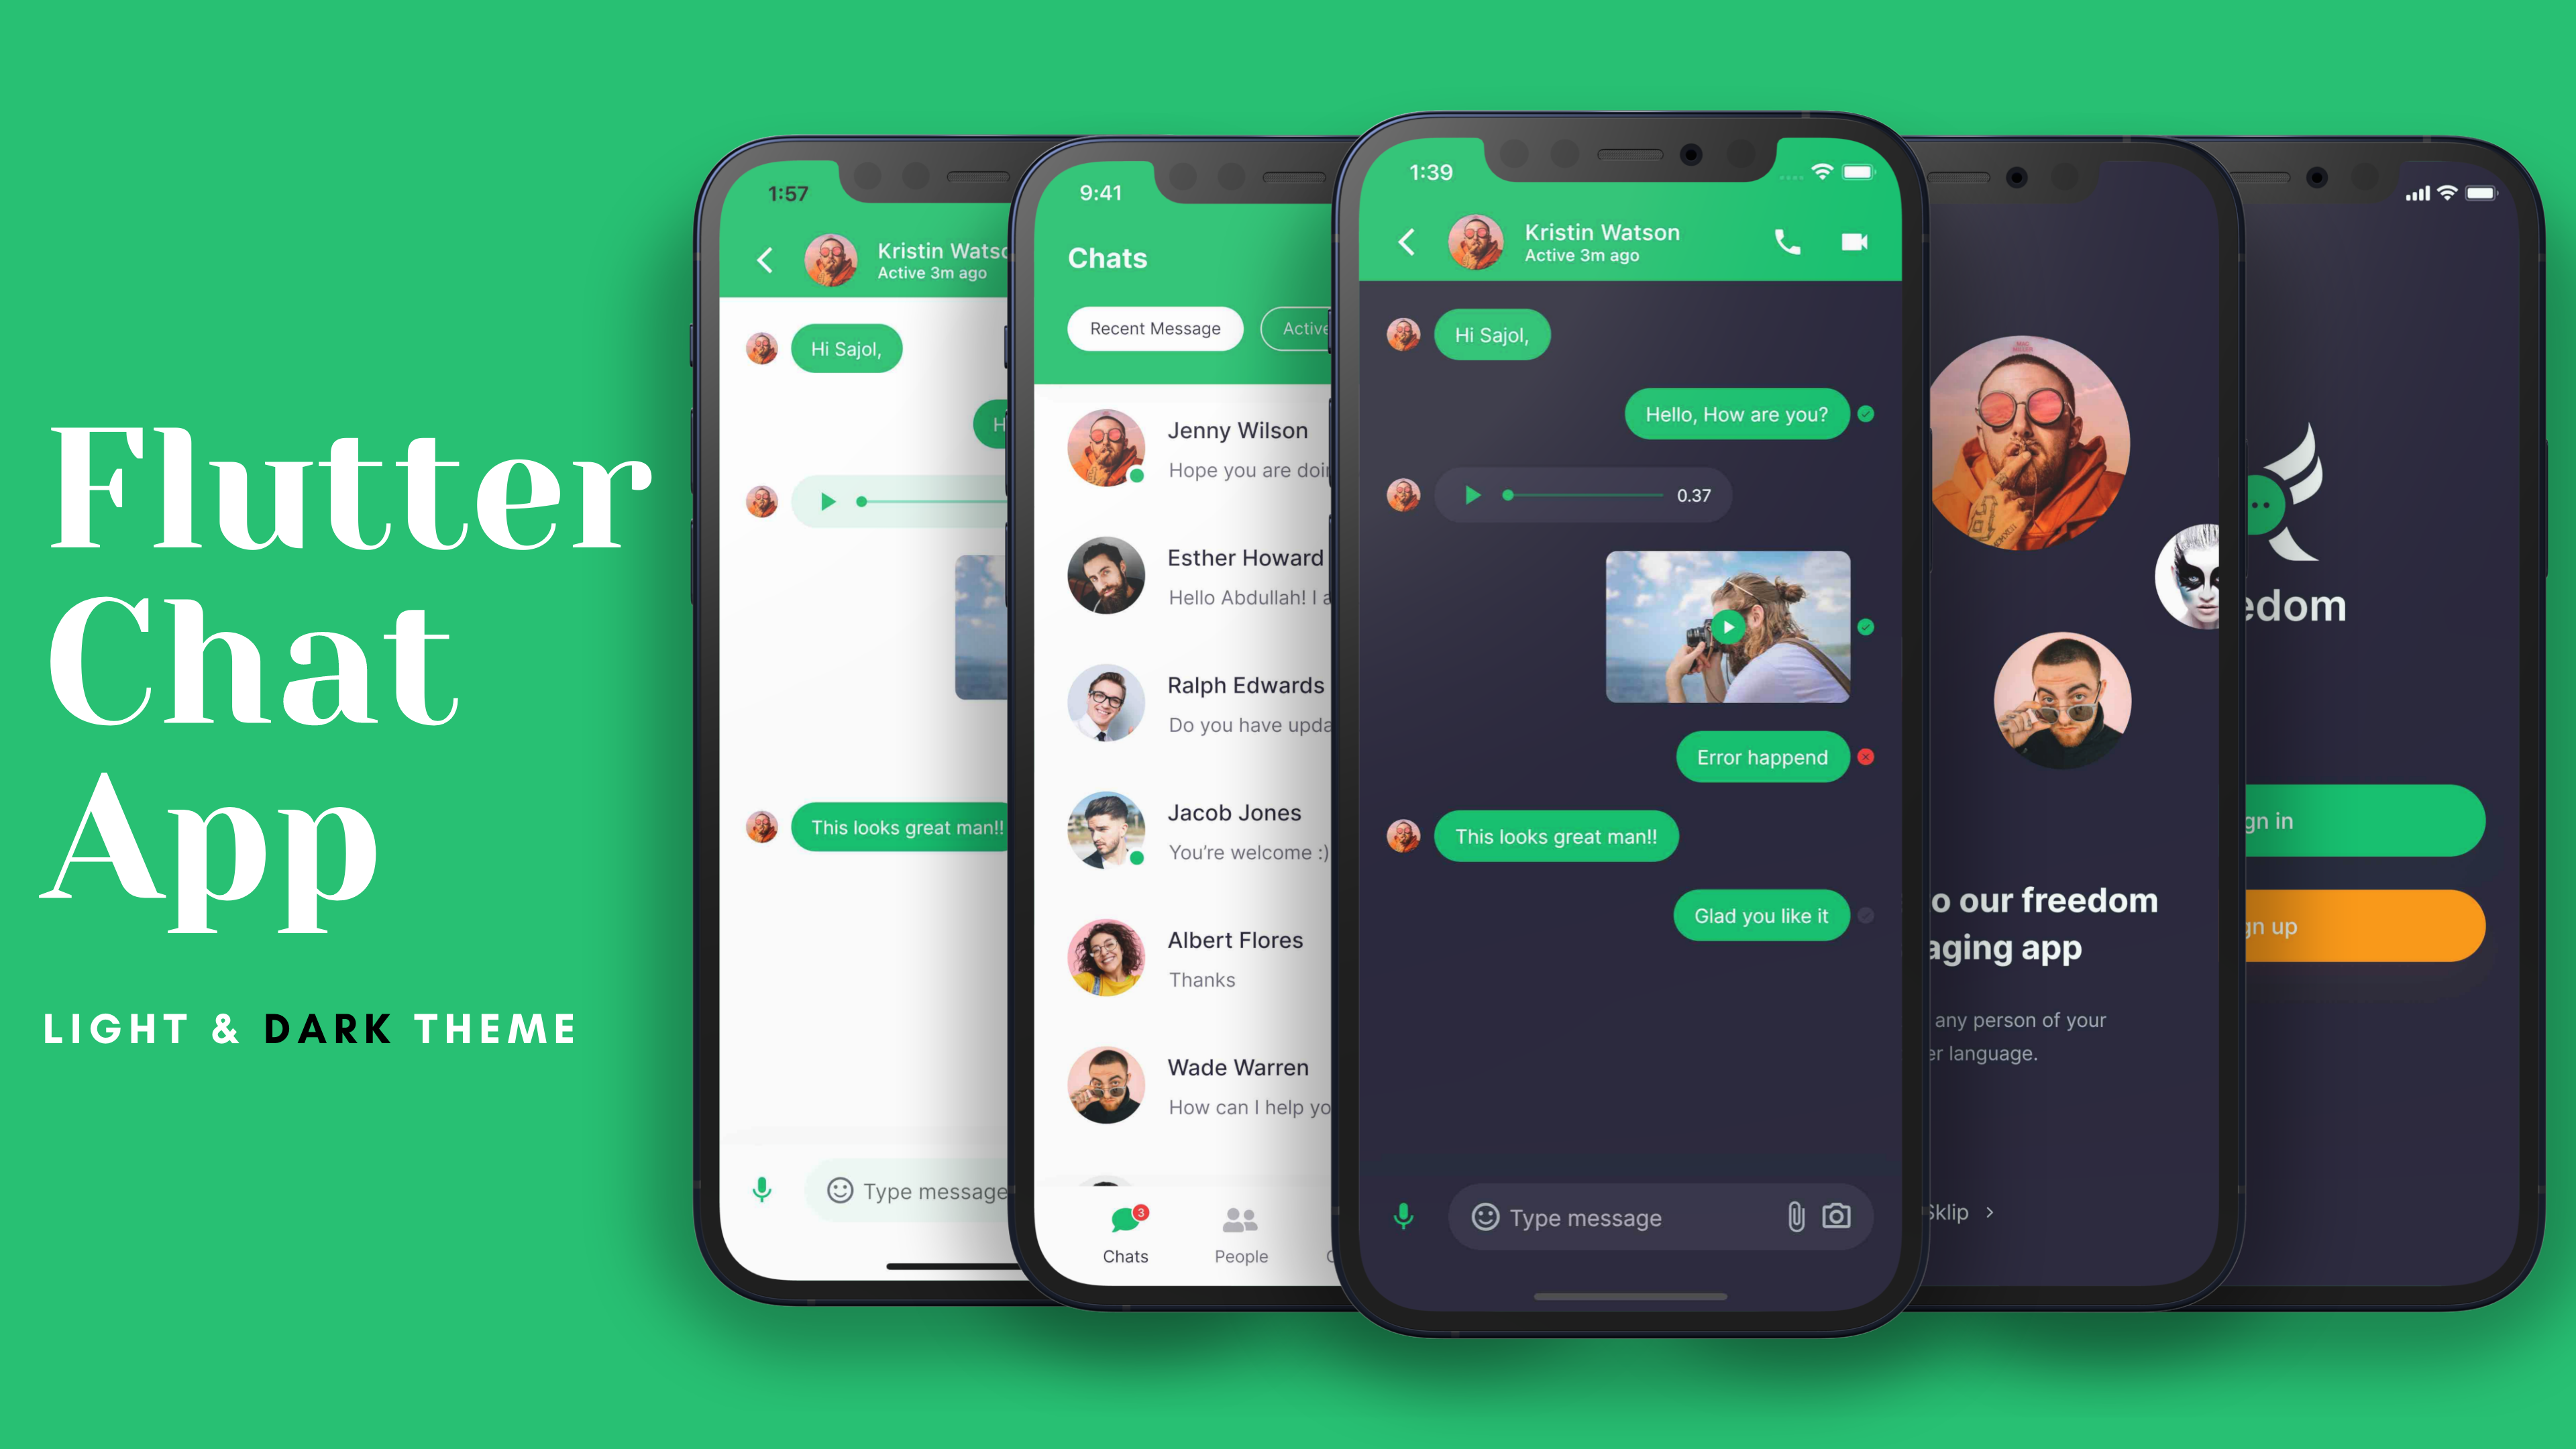 Chat Messaging App Light and Dark Theme